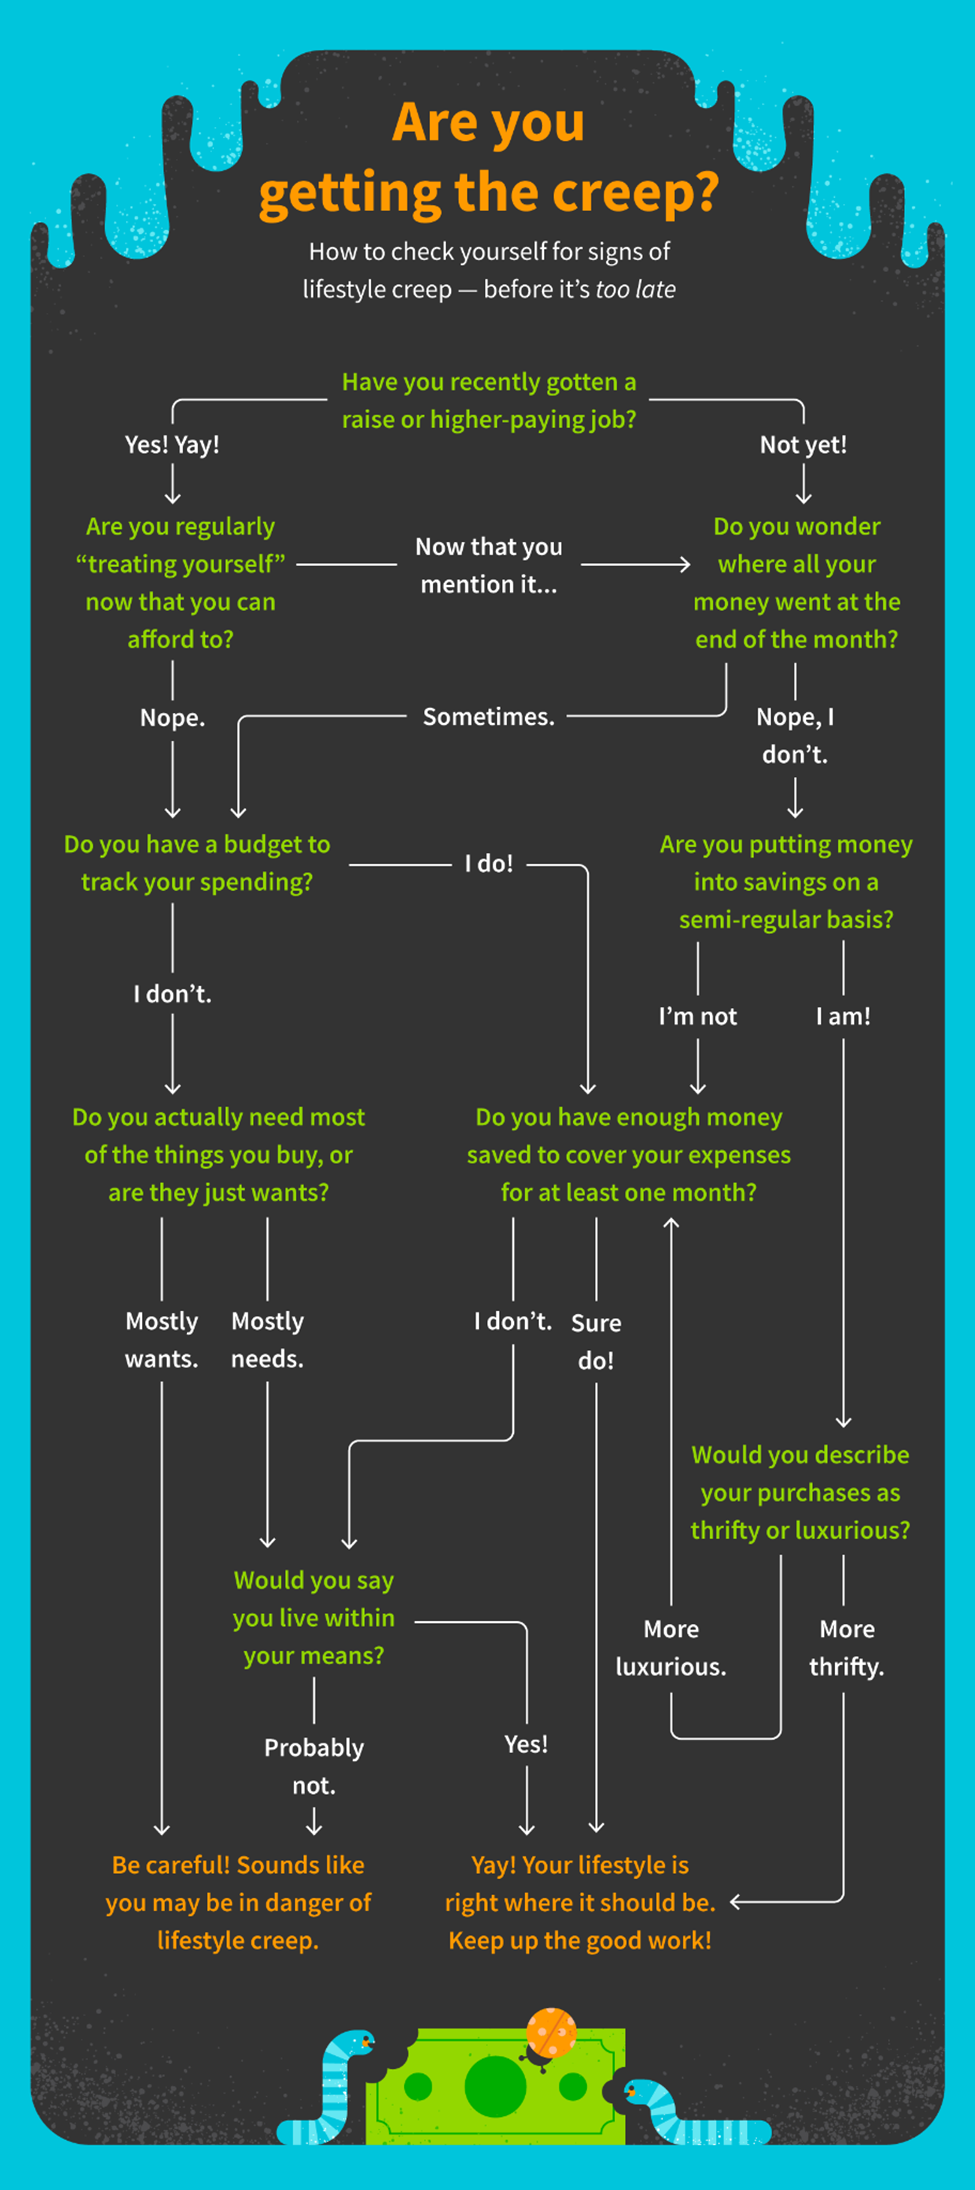 Are you getting the creep? flowchart